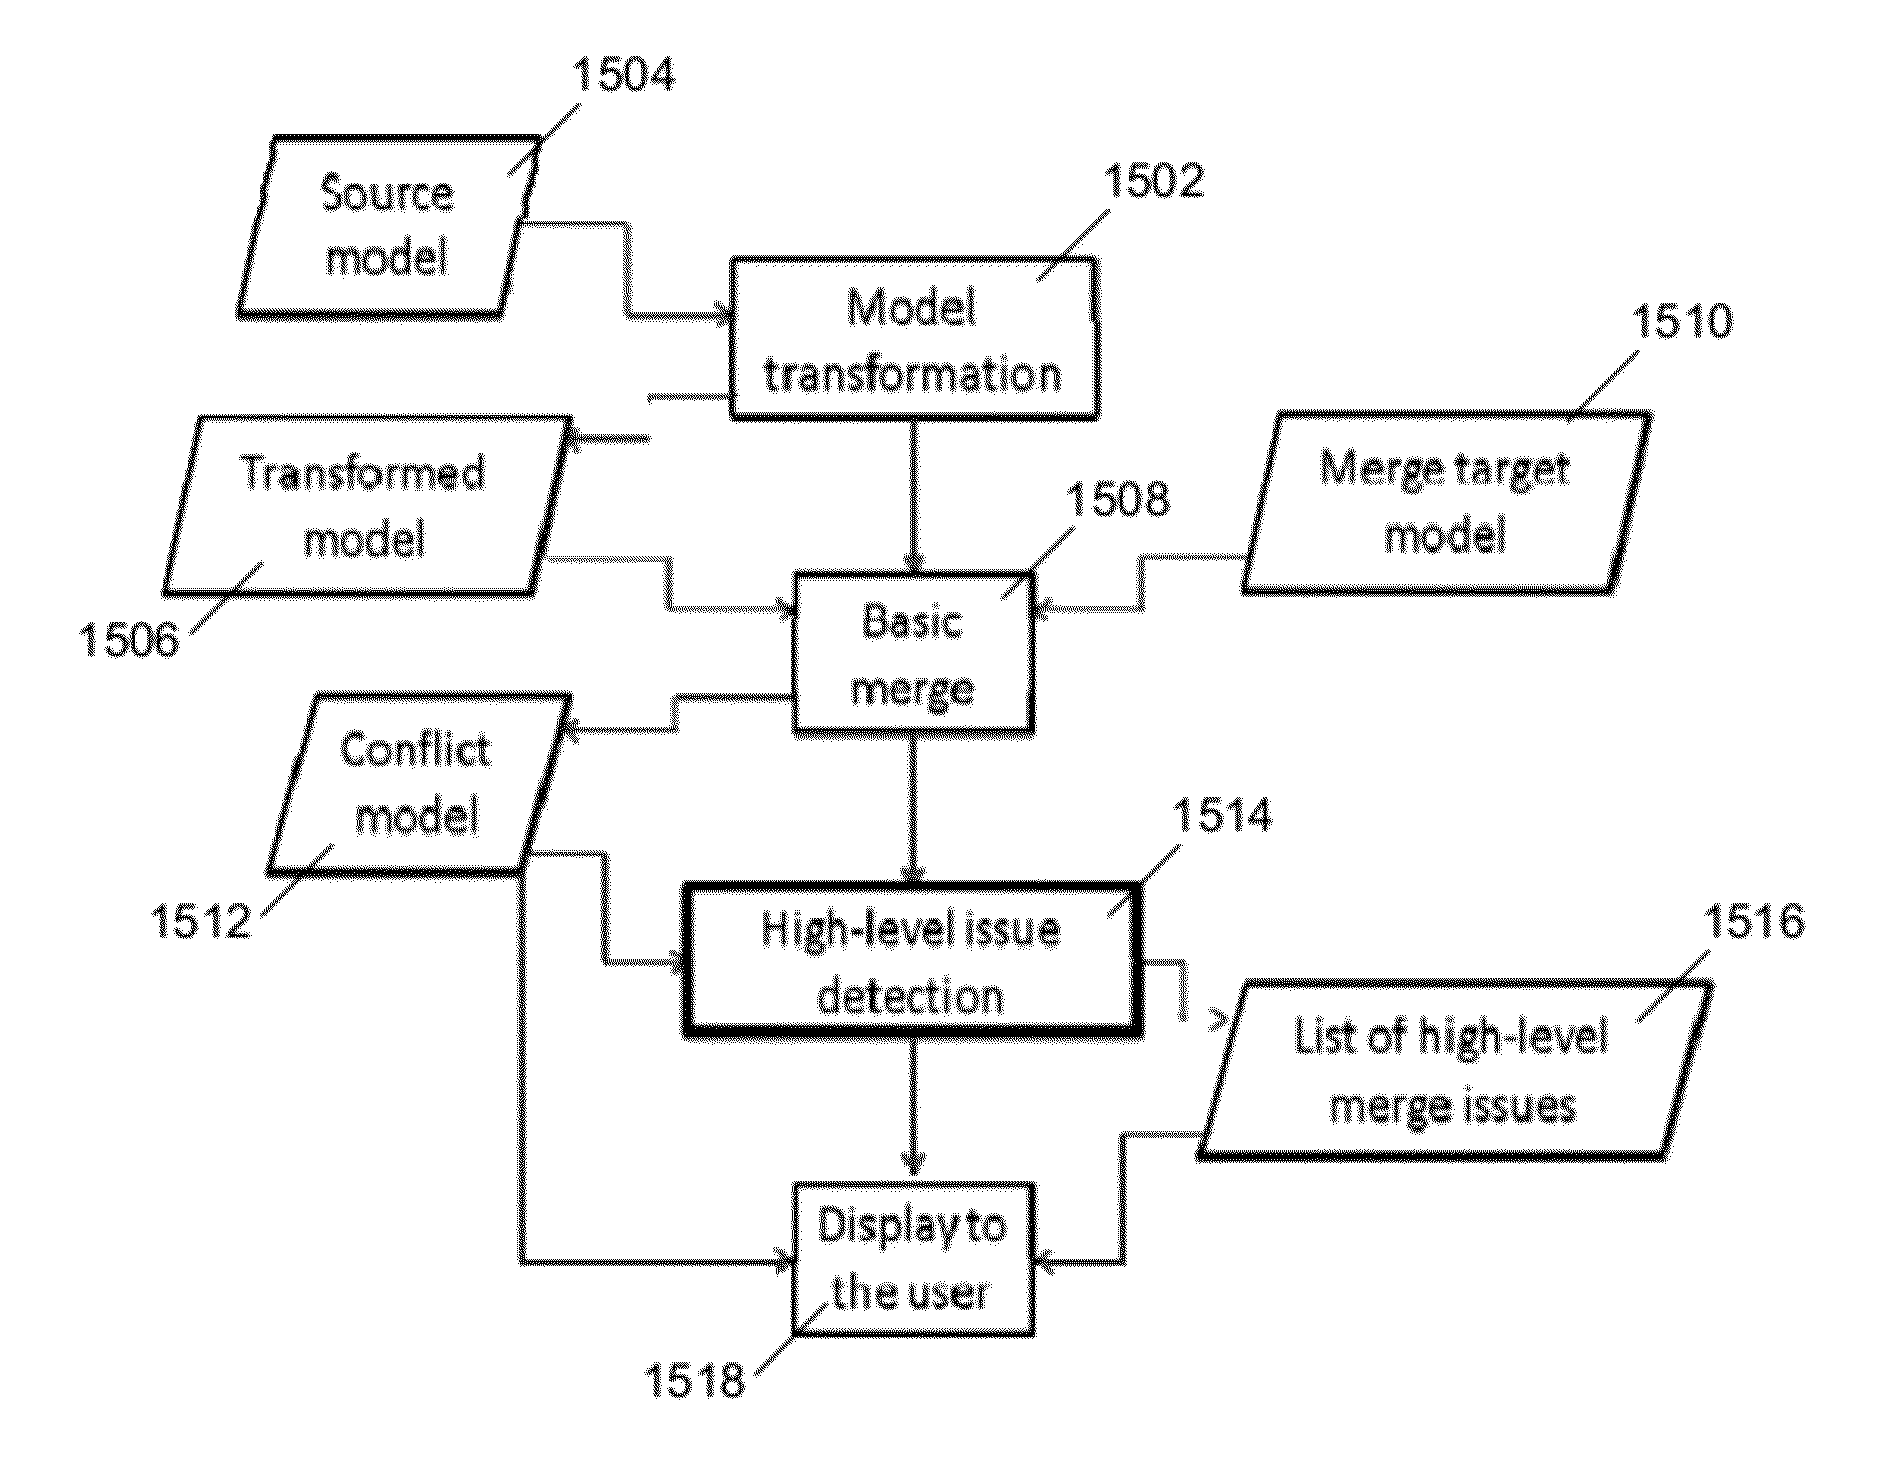 Systems and/or methods for identifying and resolving complex model merge conflicts based on atomic merge conflicts